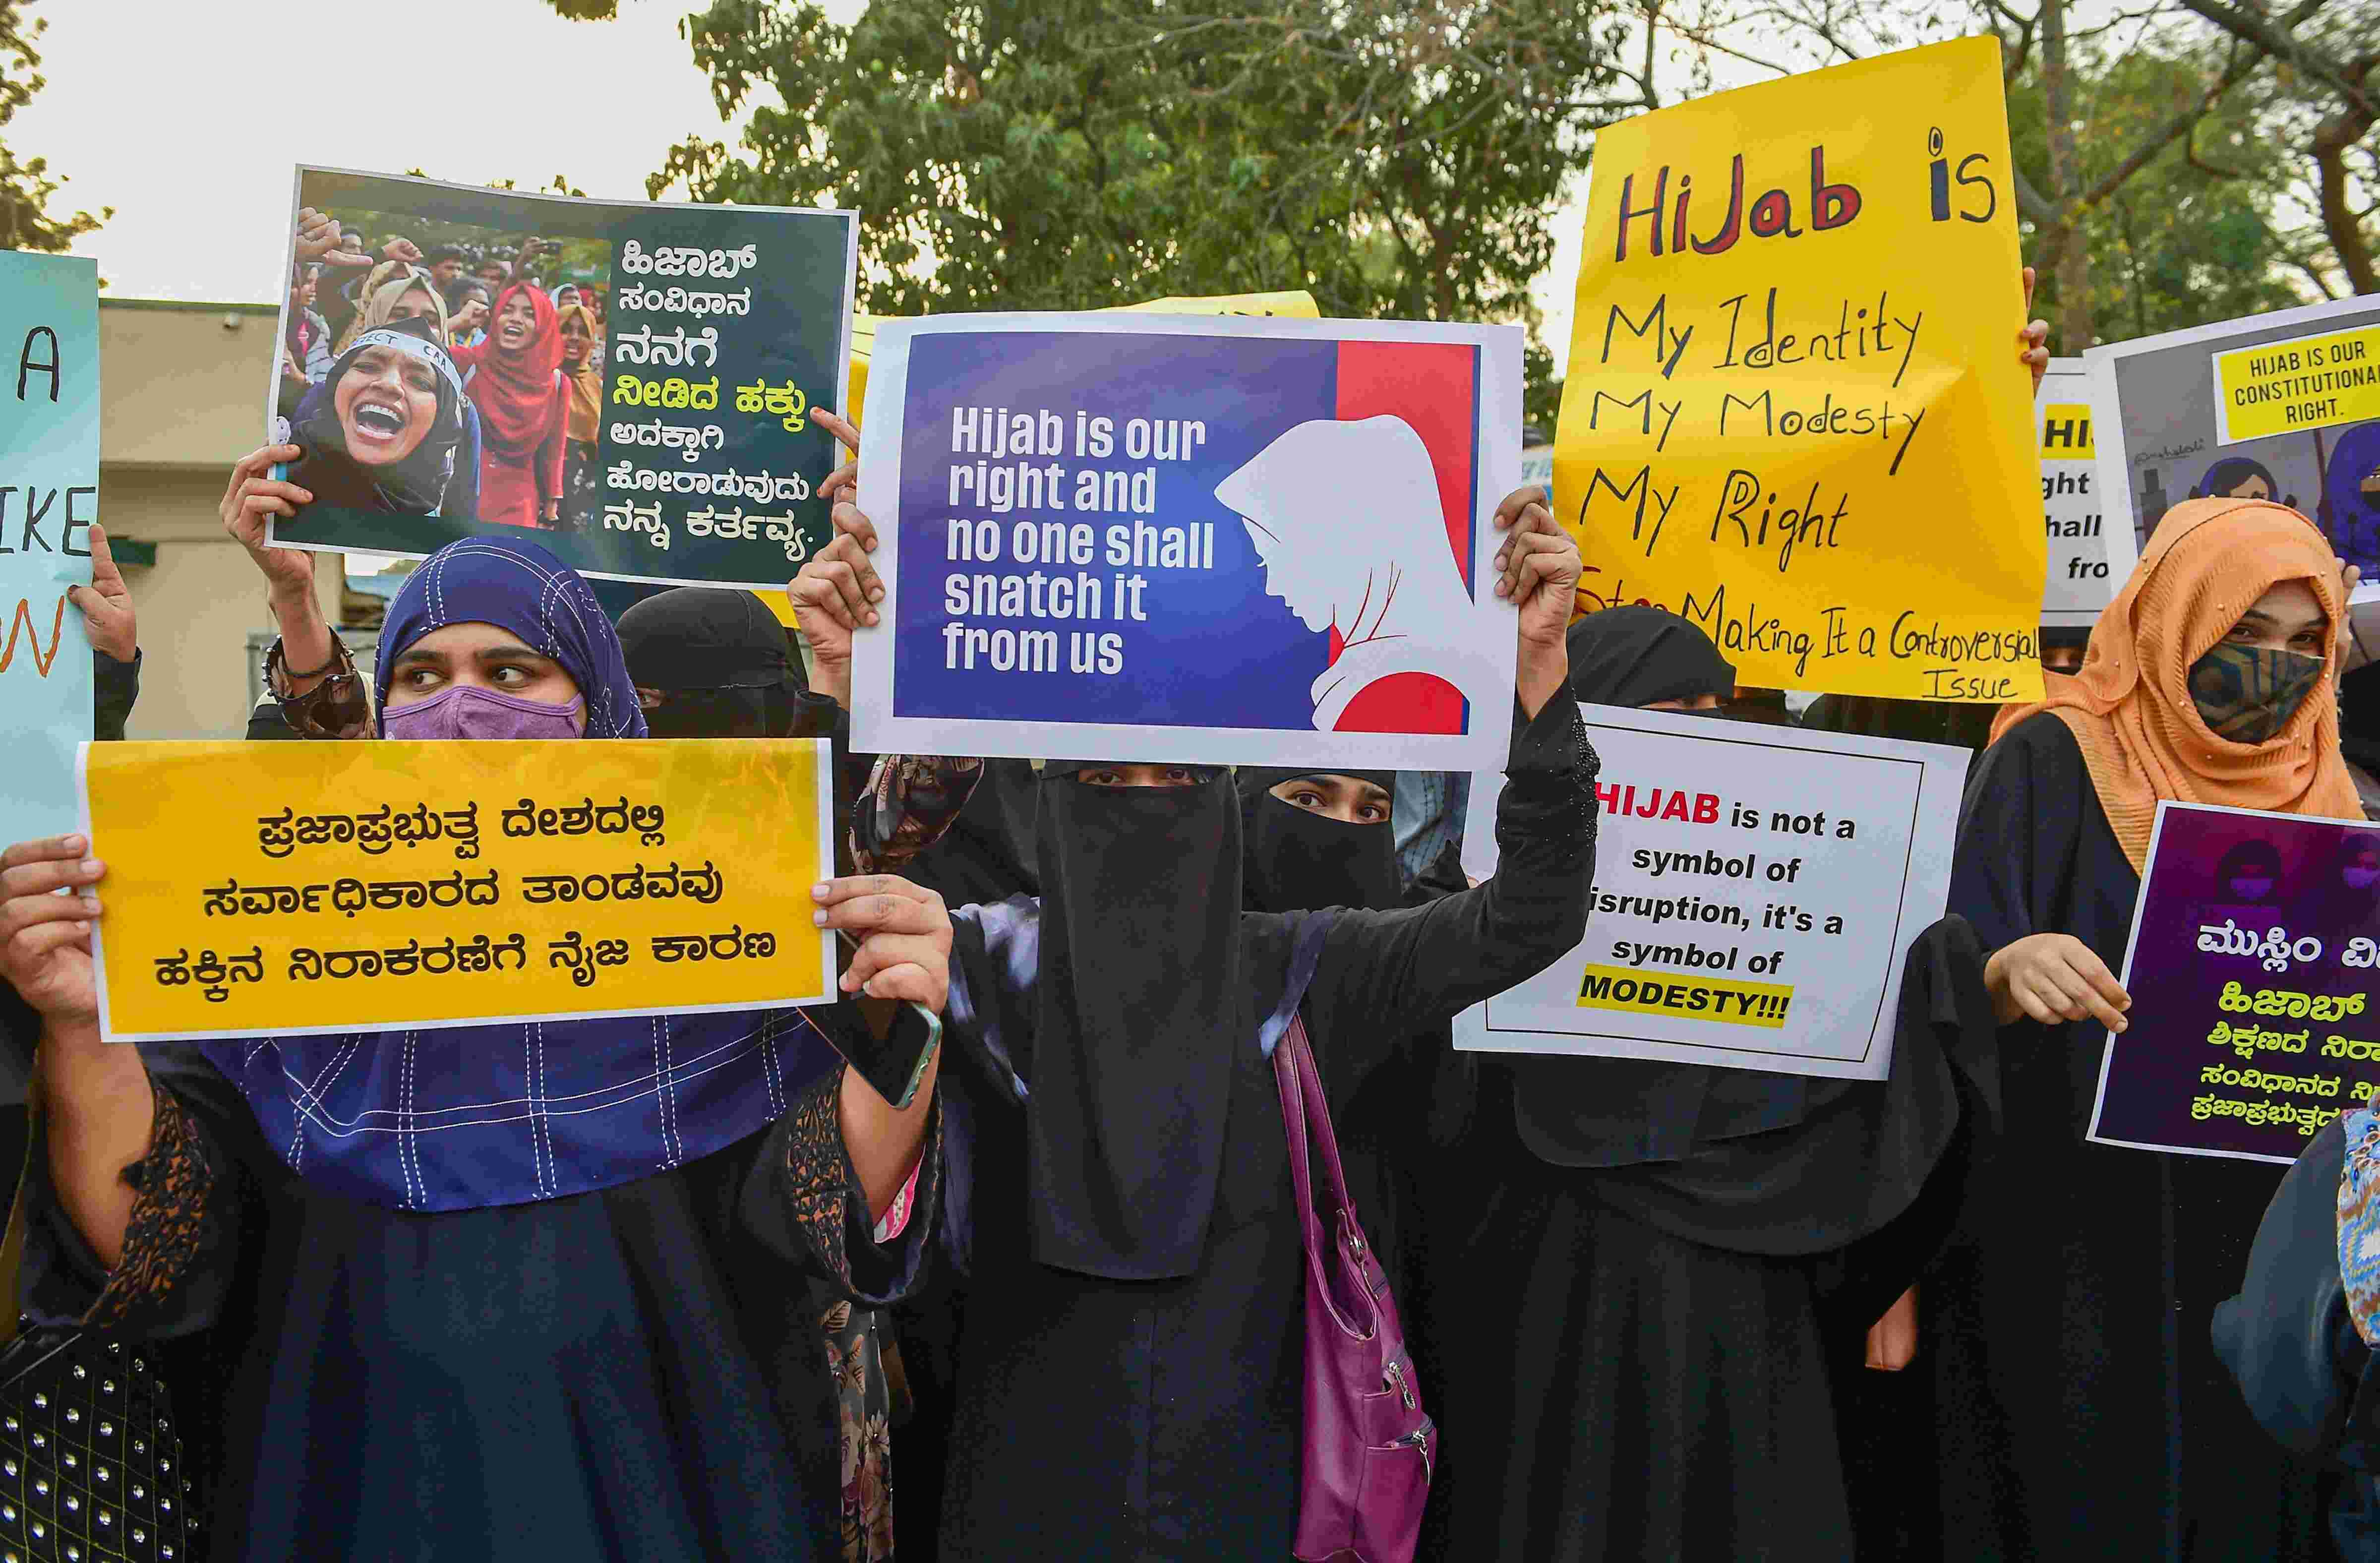 Indian secularism positive, wearing hijab not a display of religious jingoism, argue Muslim girls in Ktaka HC